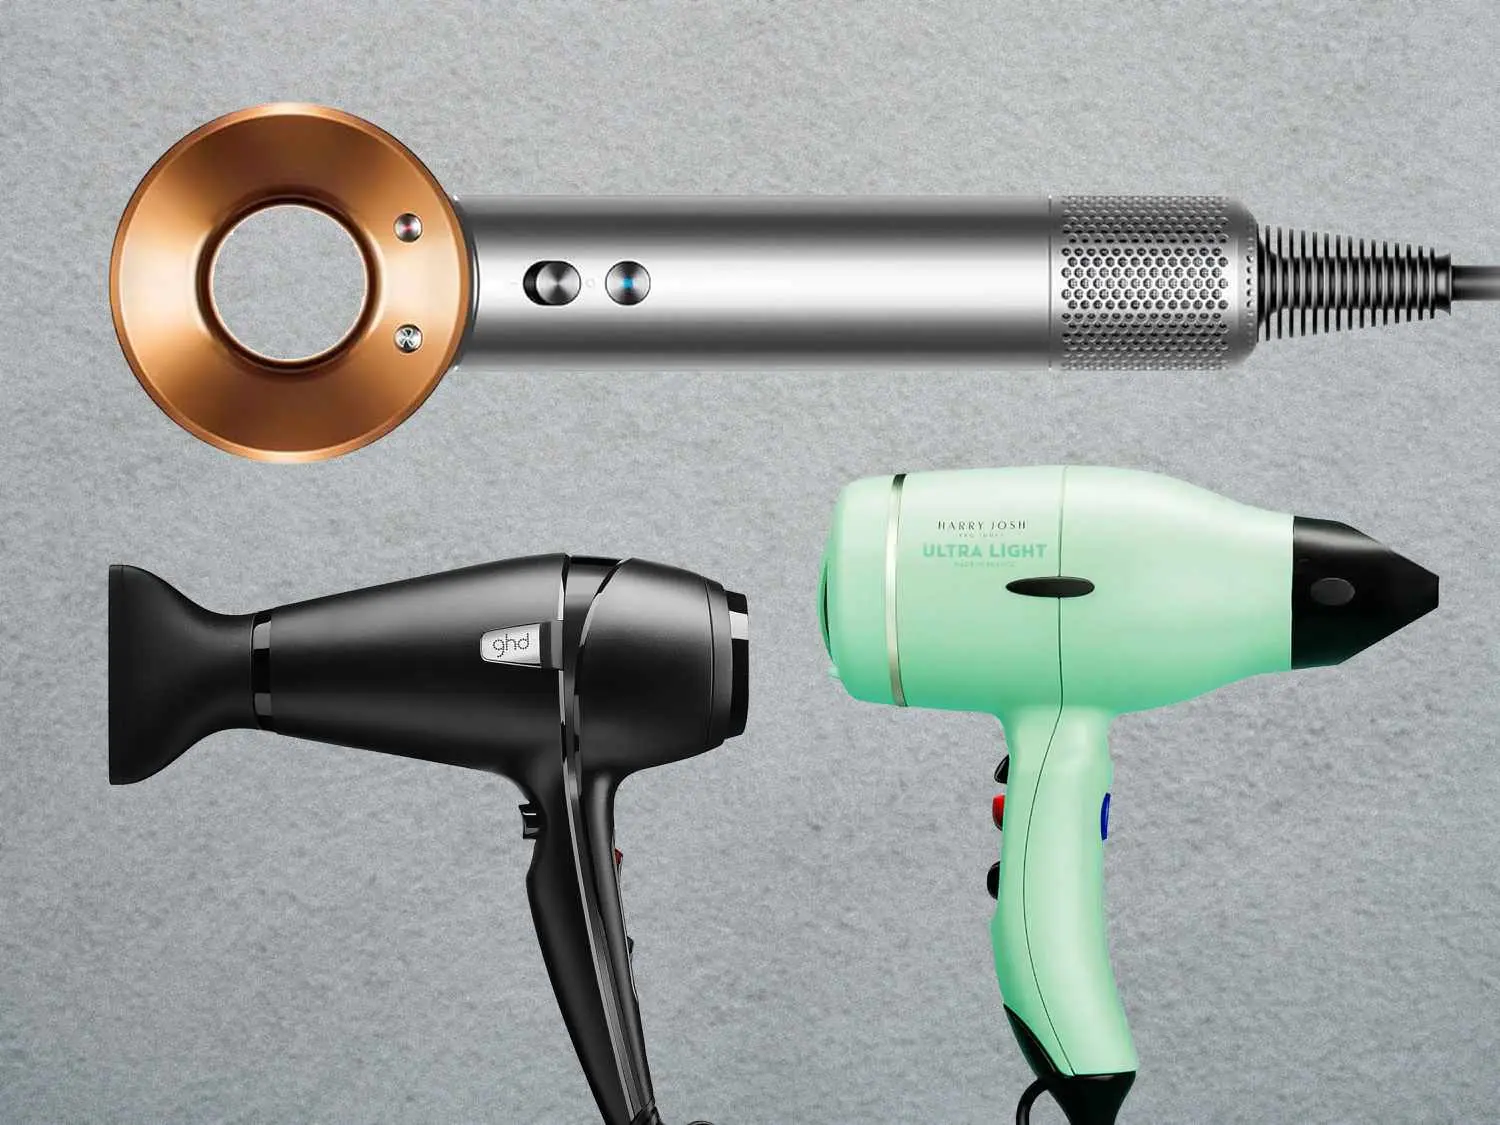 ferrari hair dryer - What is the most powerful professional hair dryer